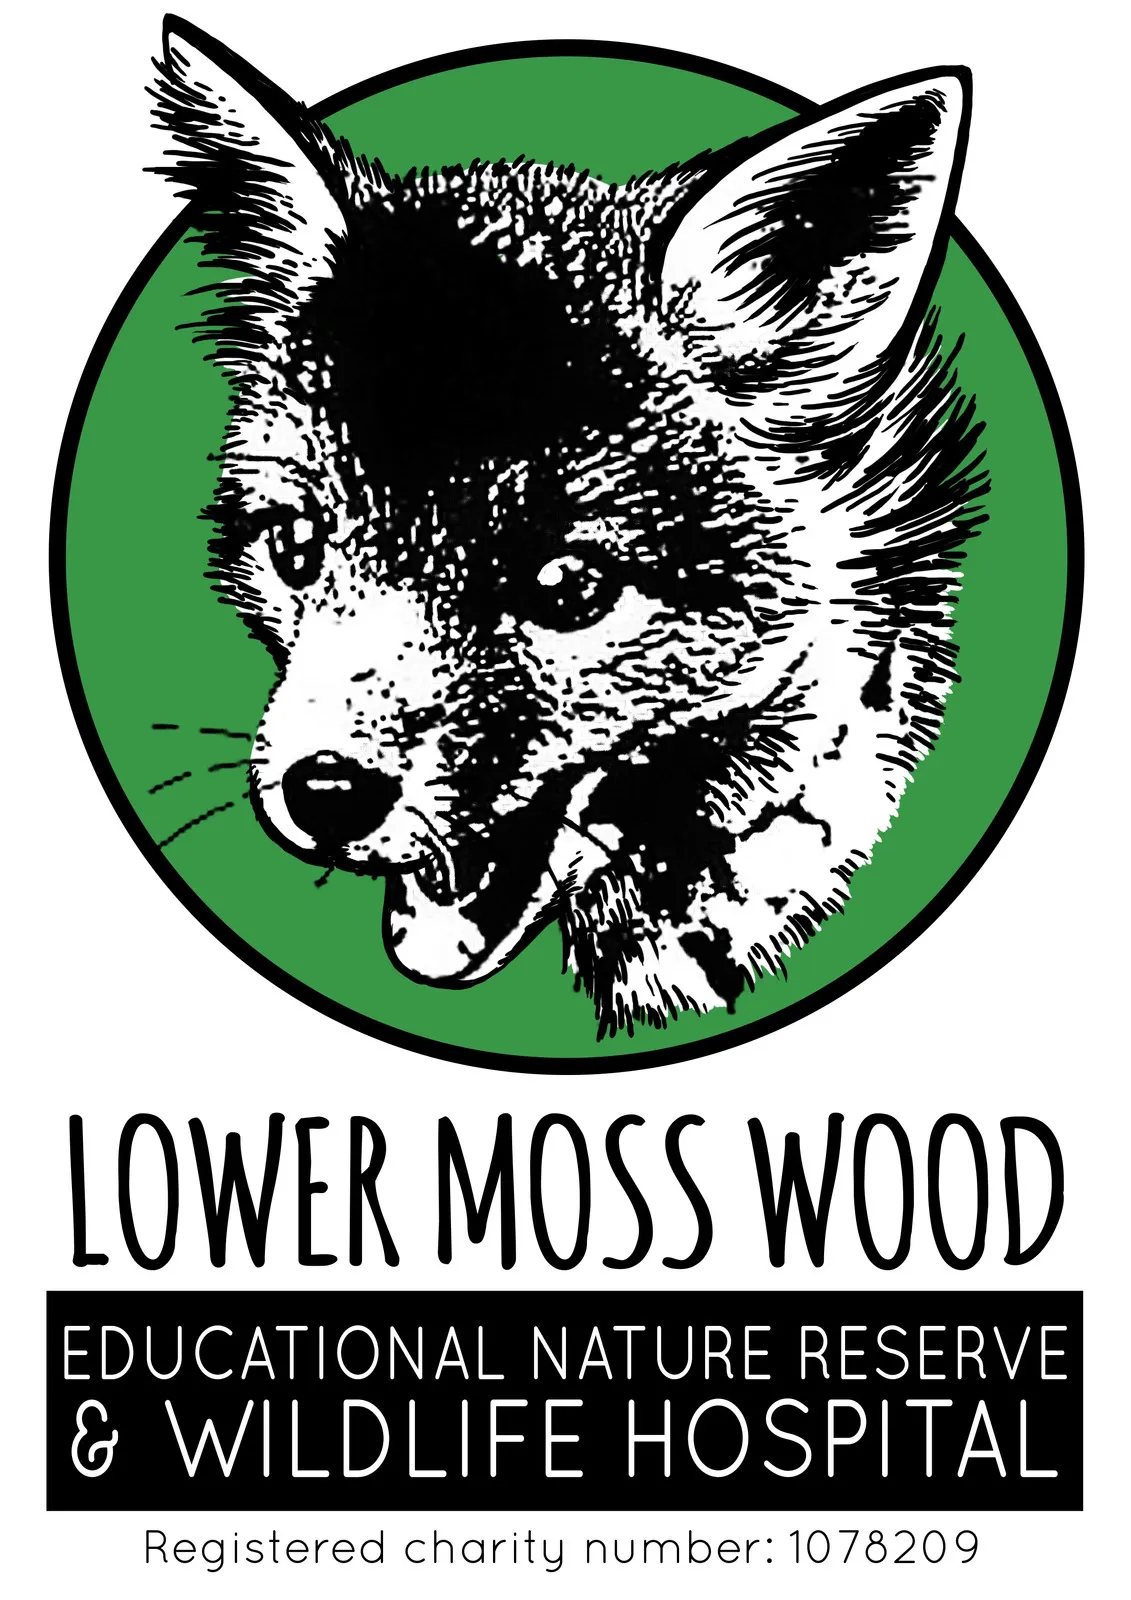 The Lower Moss Wood Educational Nature Reserve And Wild Life Hospital